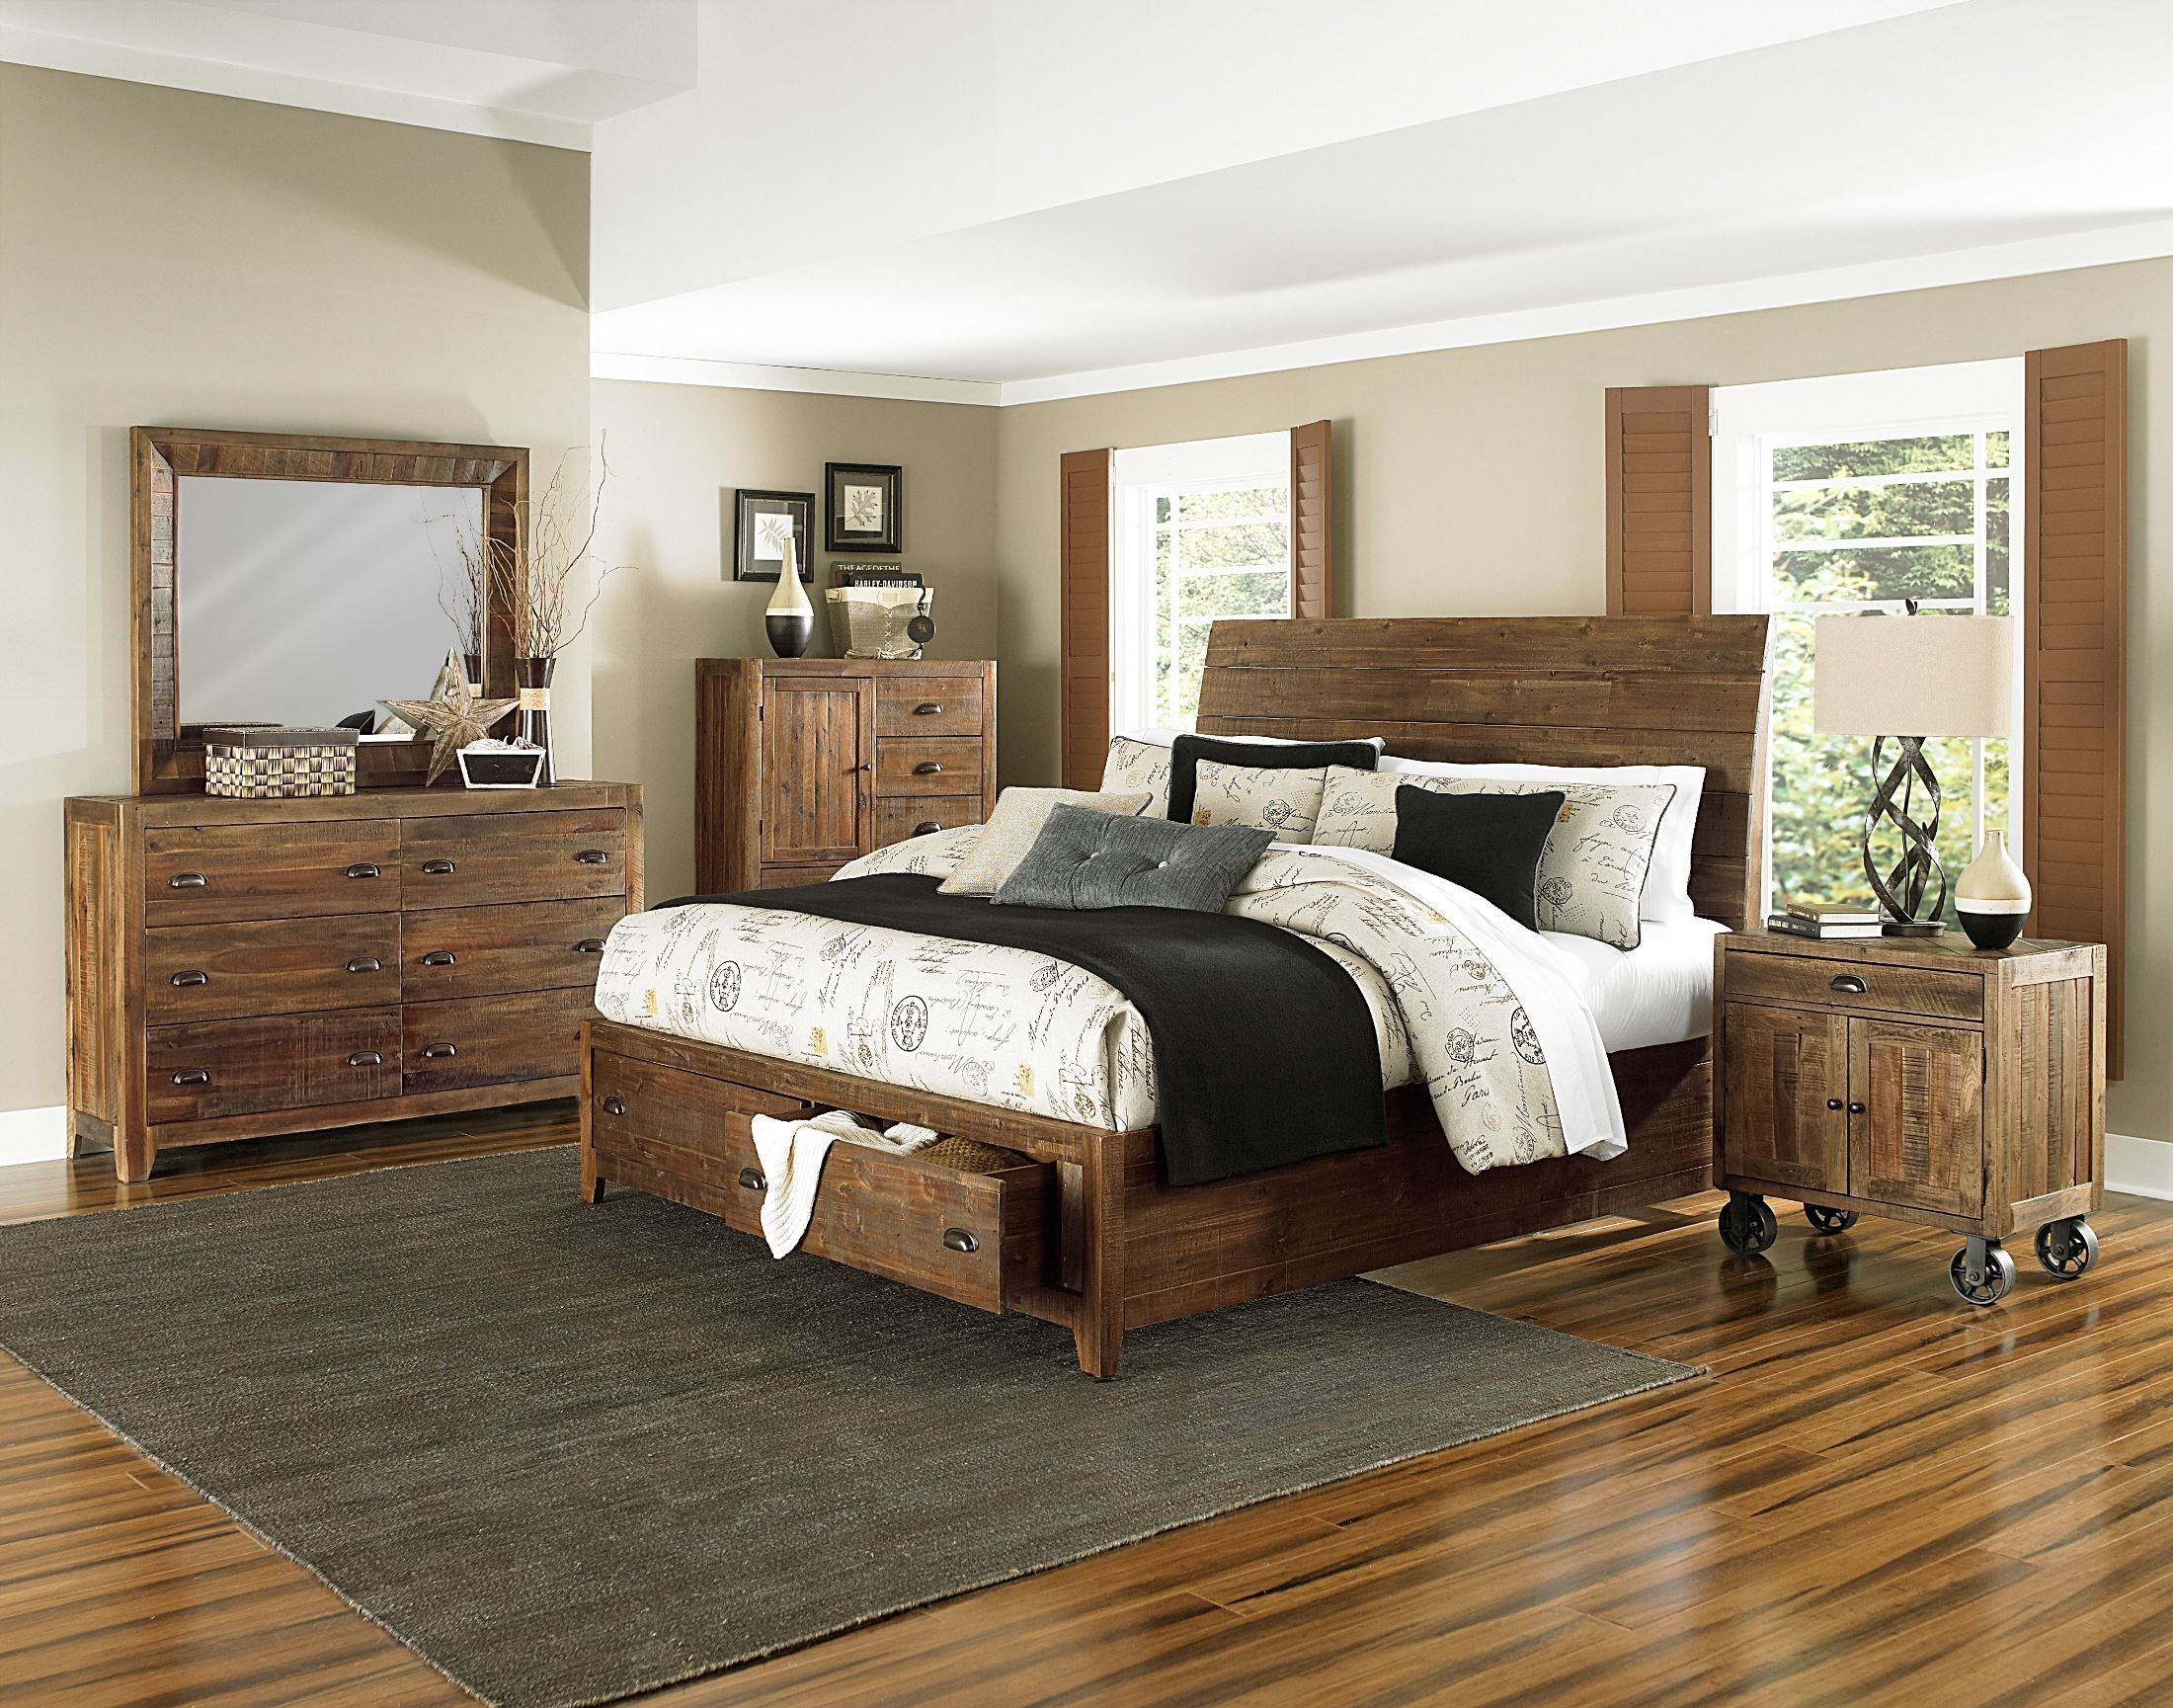 River Ridge Island Storage Bedroom Set Cabin Rustic Wood Bed intended for size 2200 X 1729